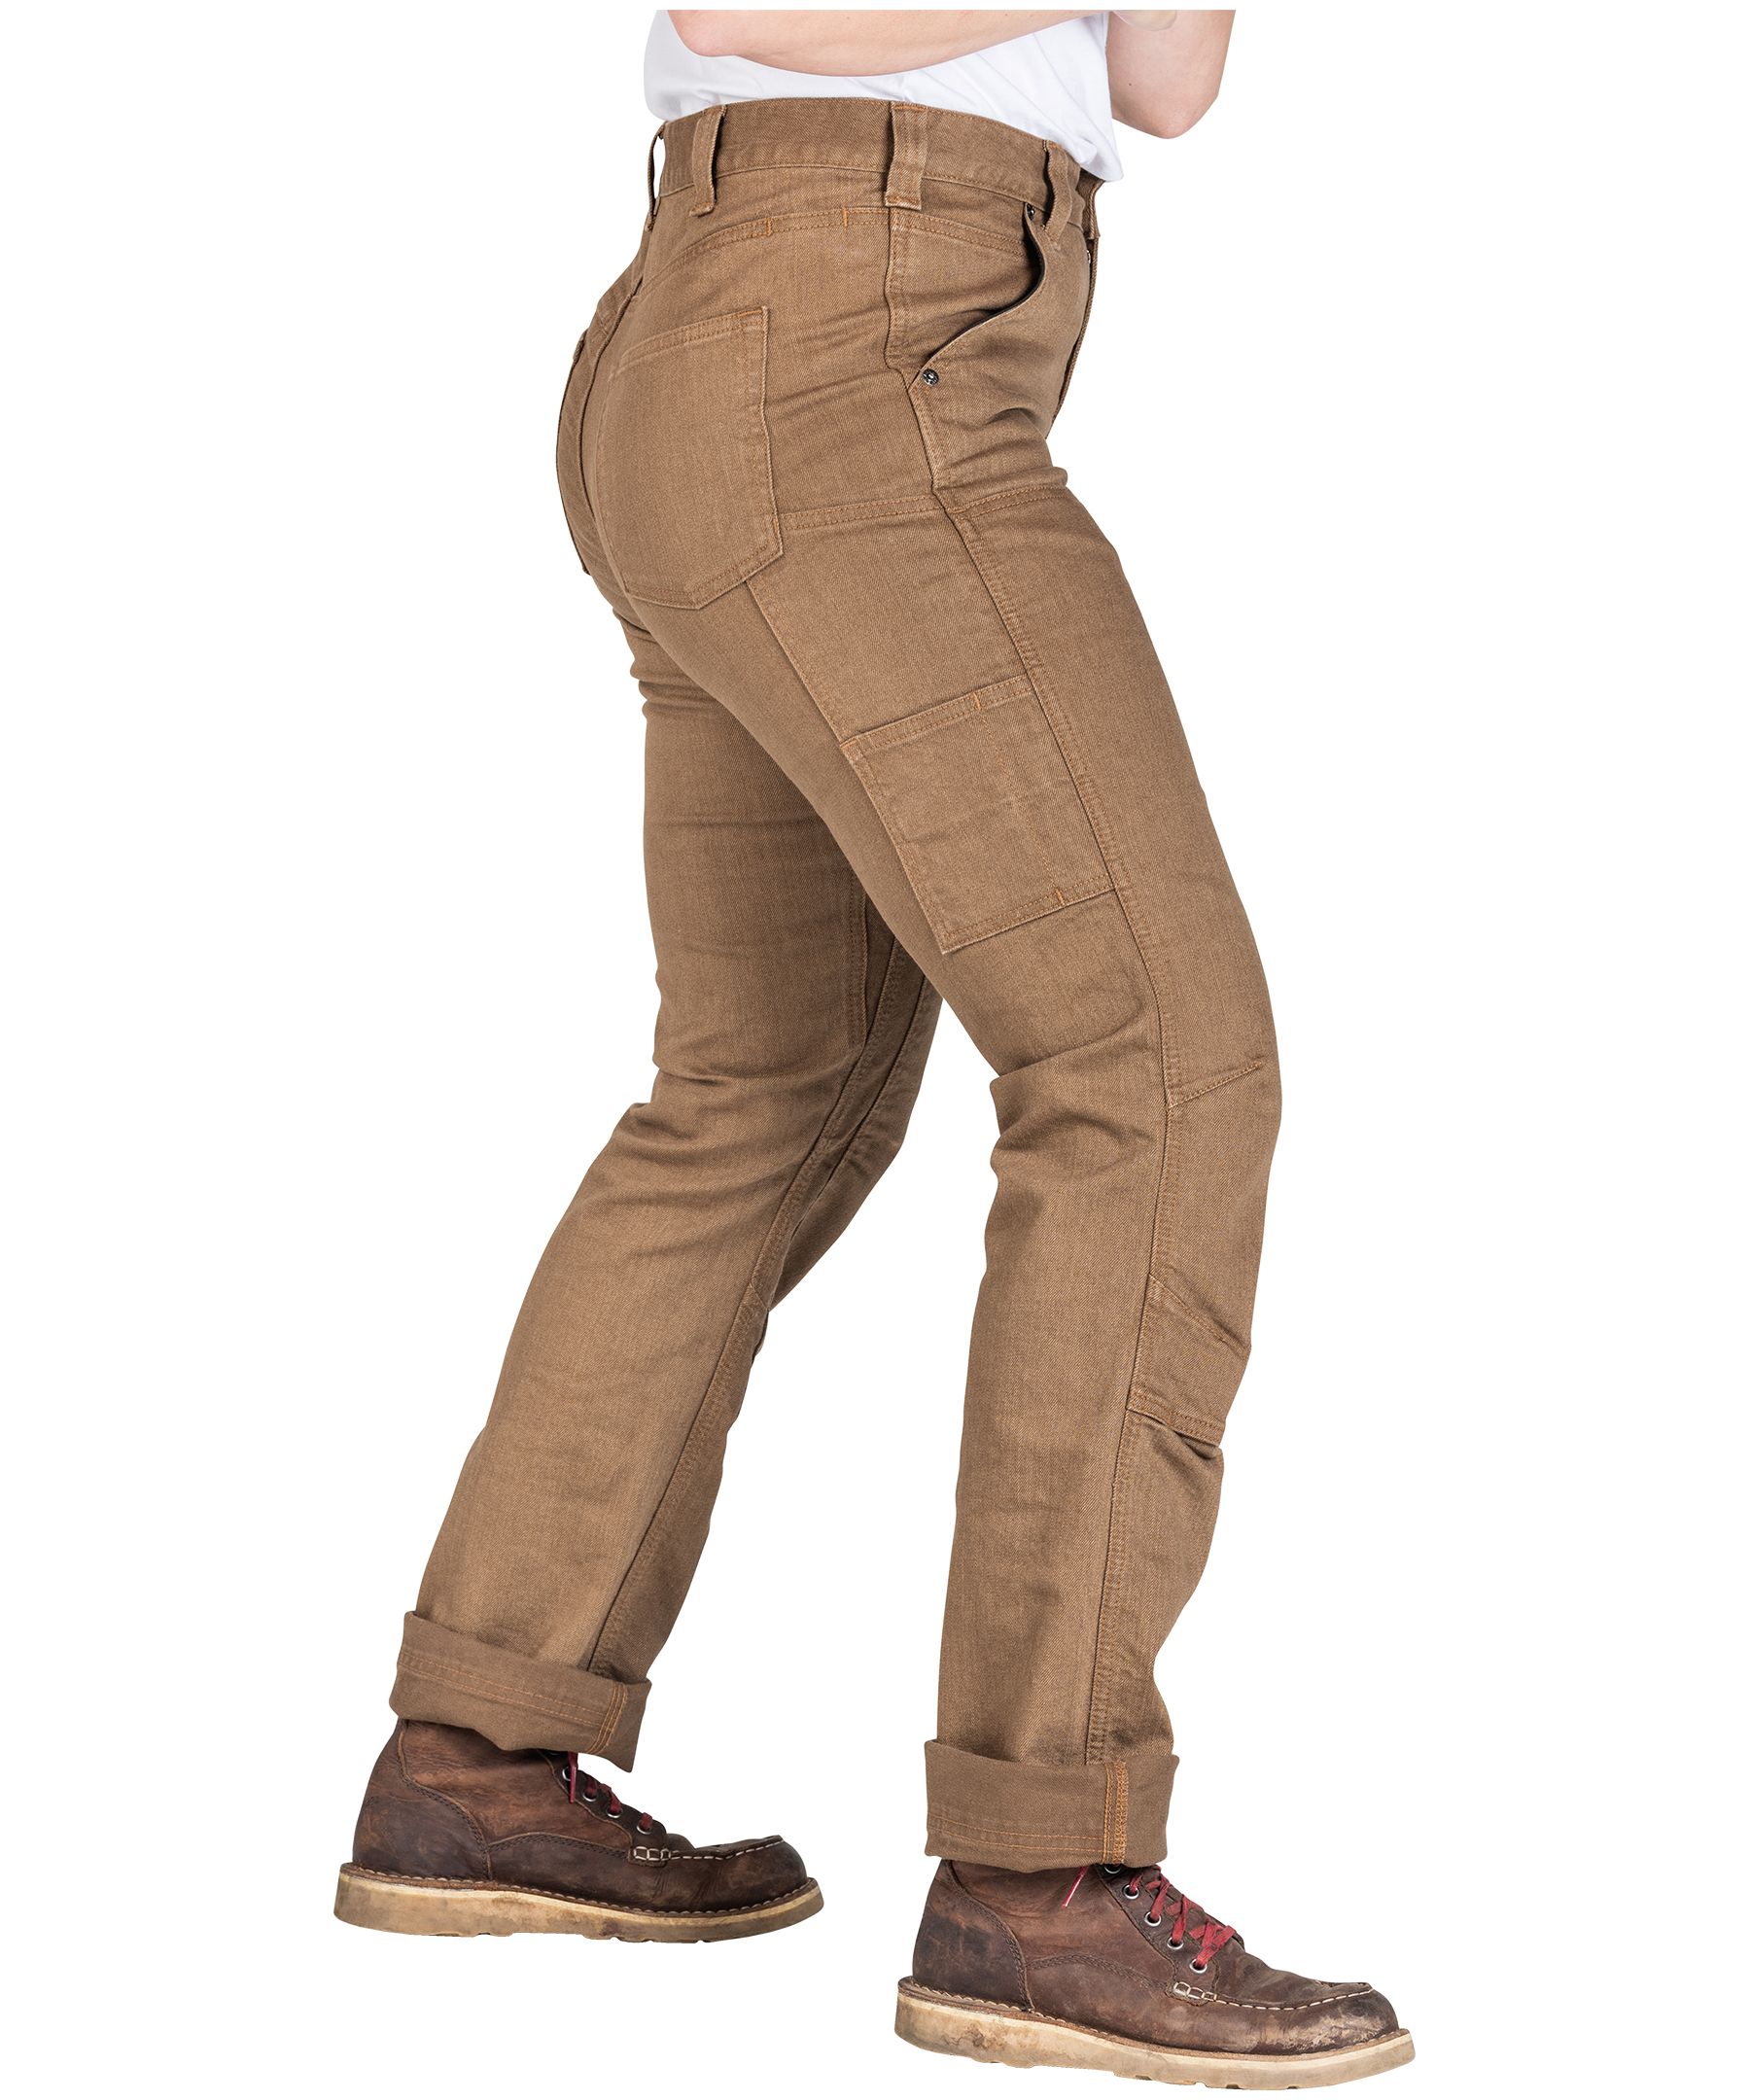 Dovetail Workwear Women's Old School High Rise Pants